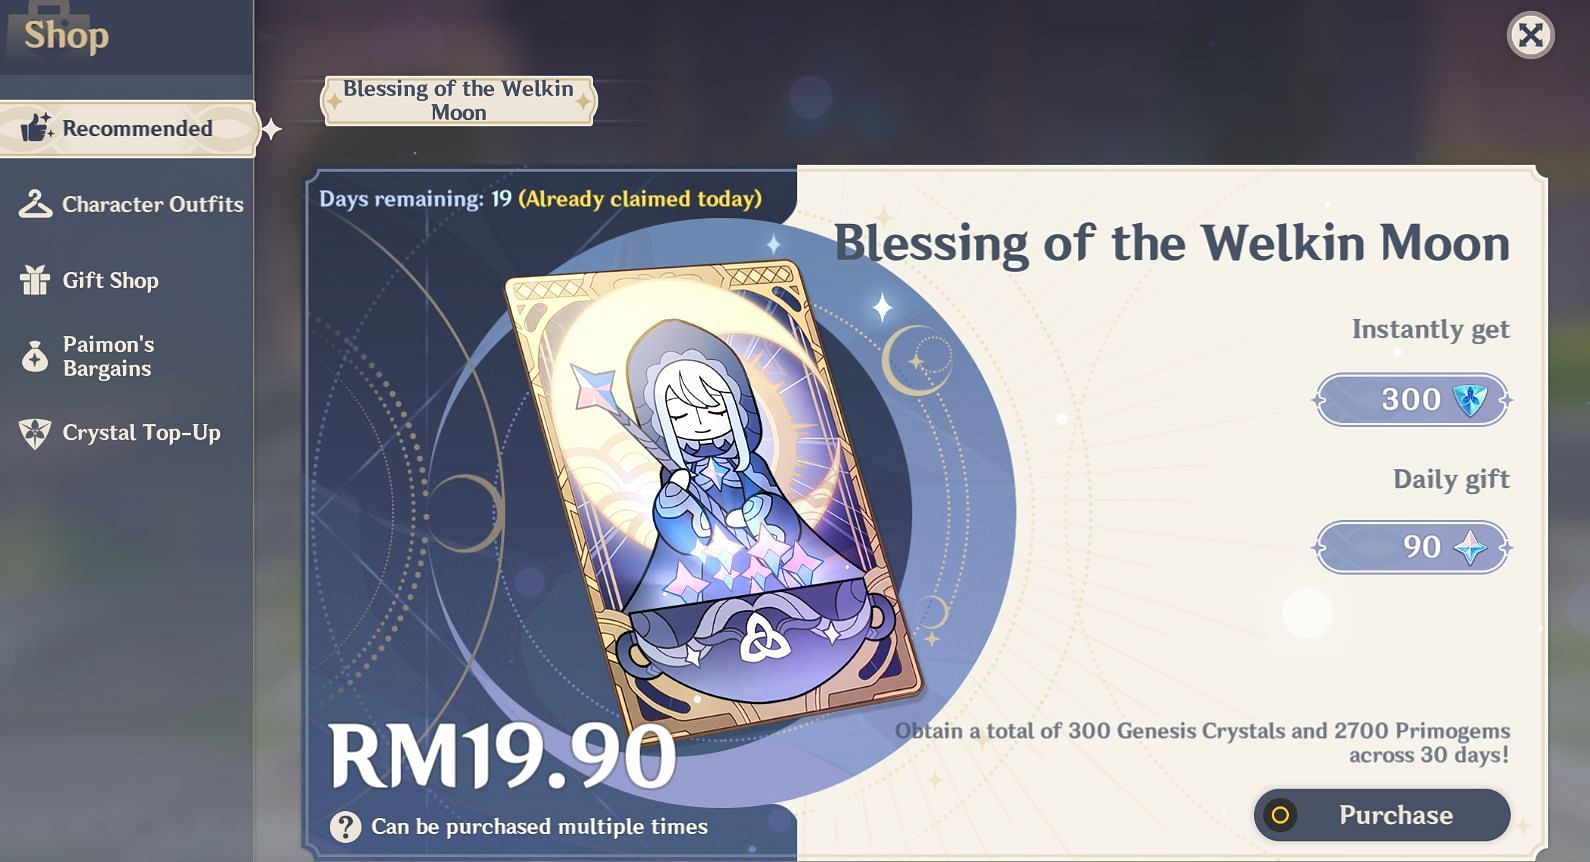 Buy Blessing of the Welkin Moon for daily Primogems (Image via HoYoverse)